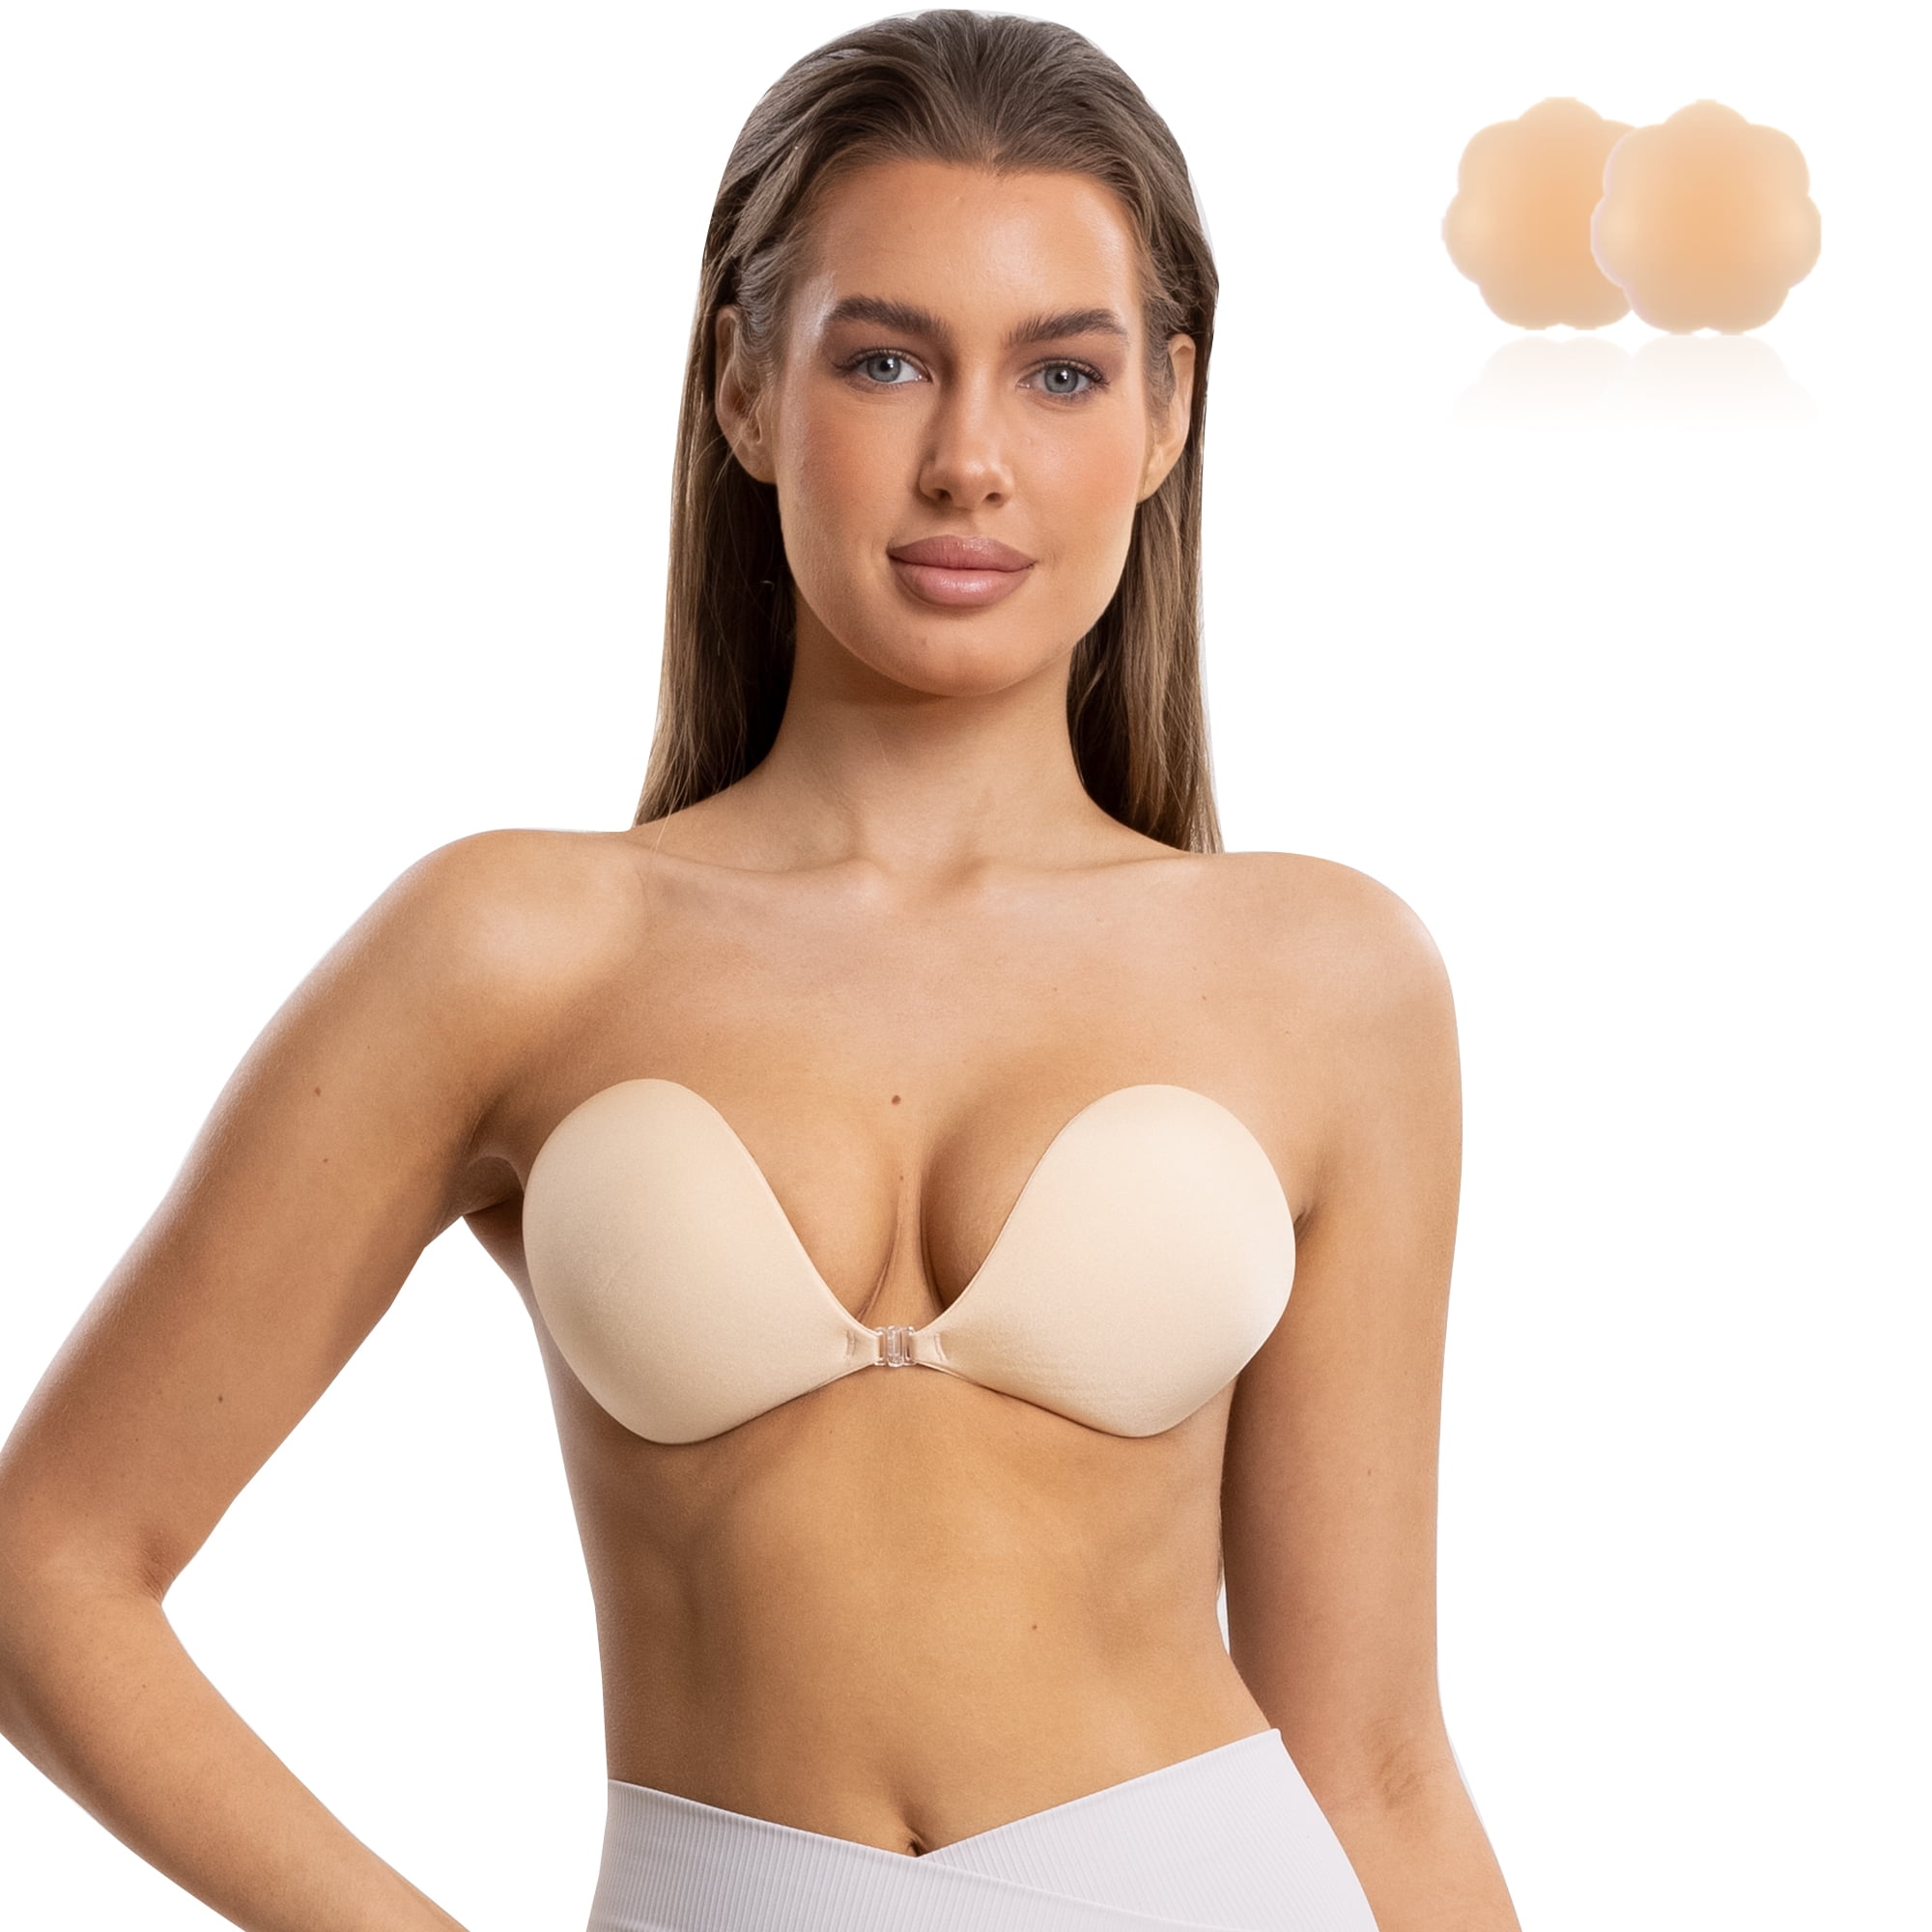 PULLIMORE 2 Pairs Women's Silicone Invisible Adhesive Bras Reusable Push Up  Gathering Sticky Bra for Backless Dress 